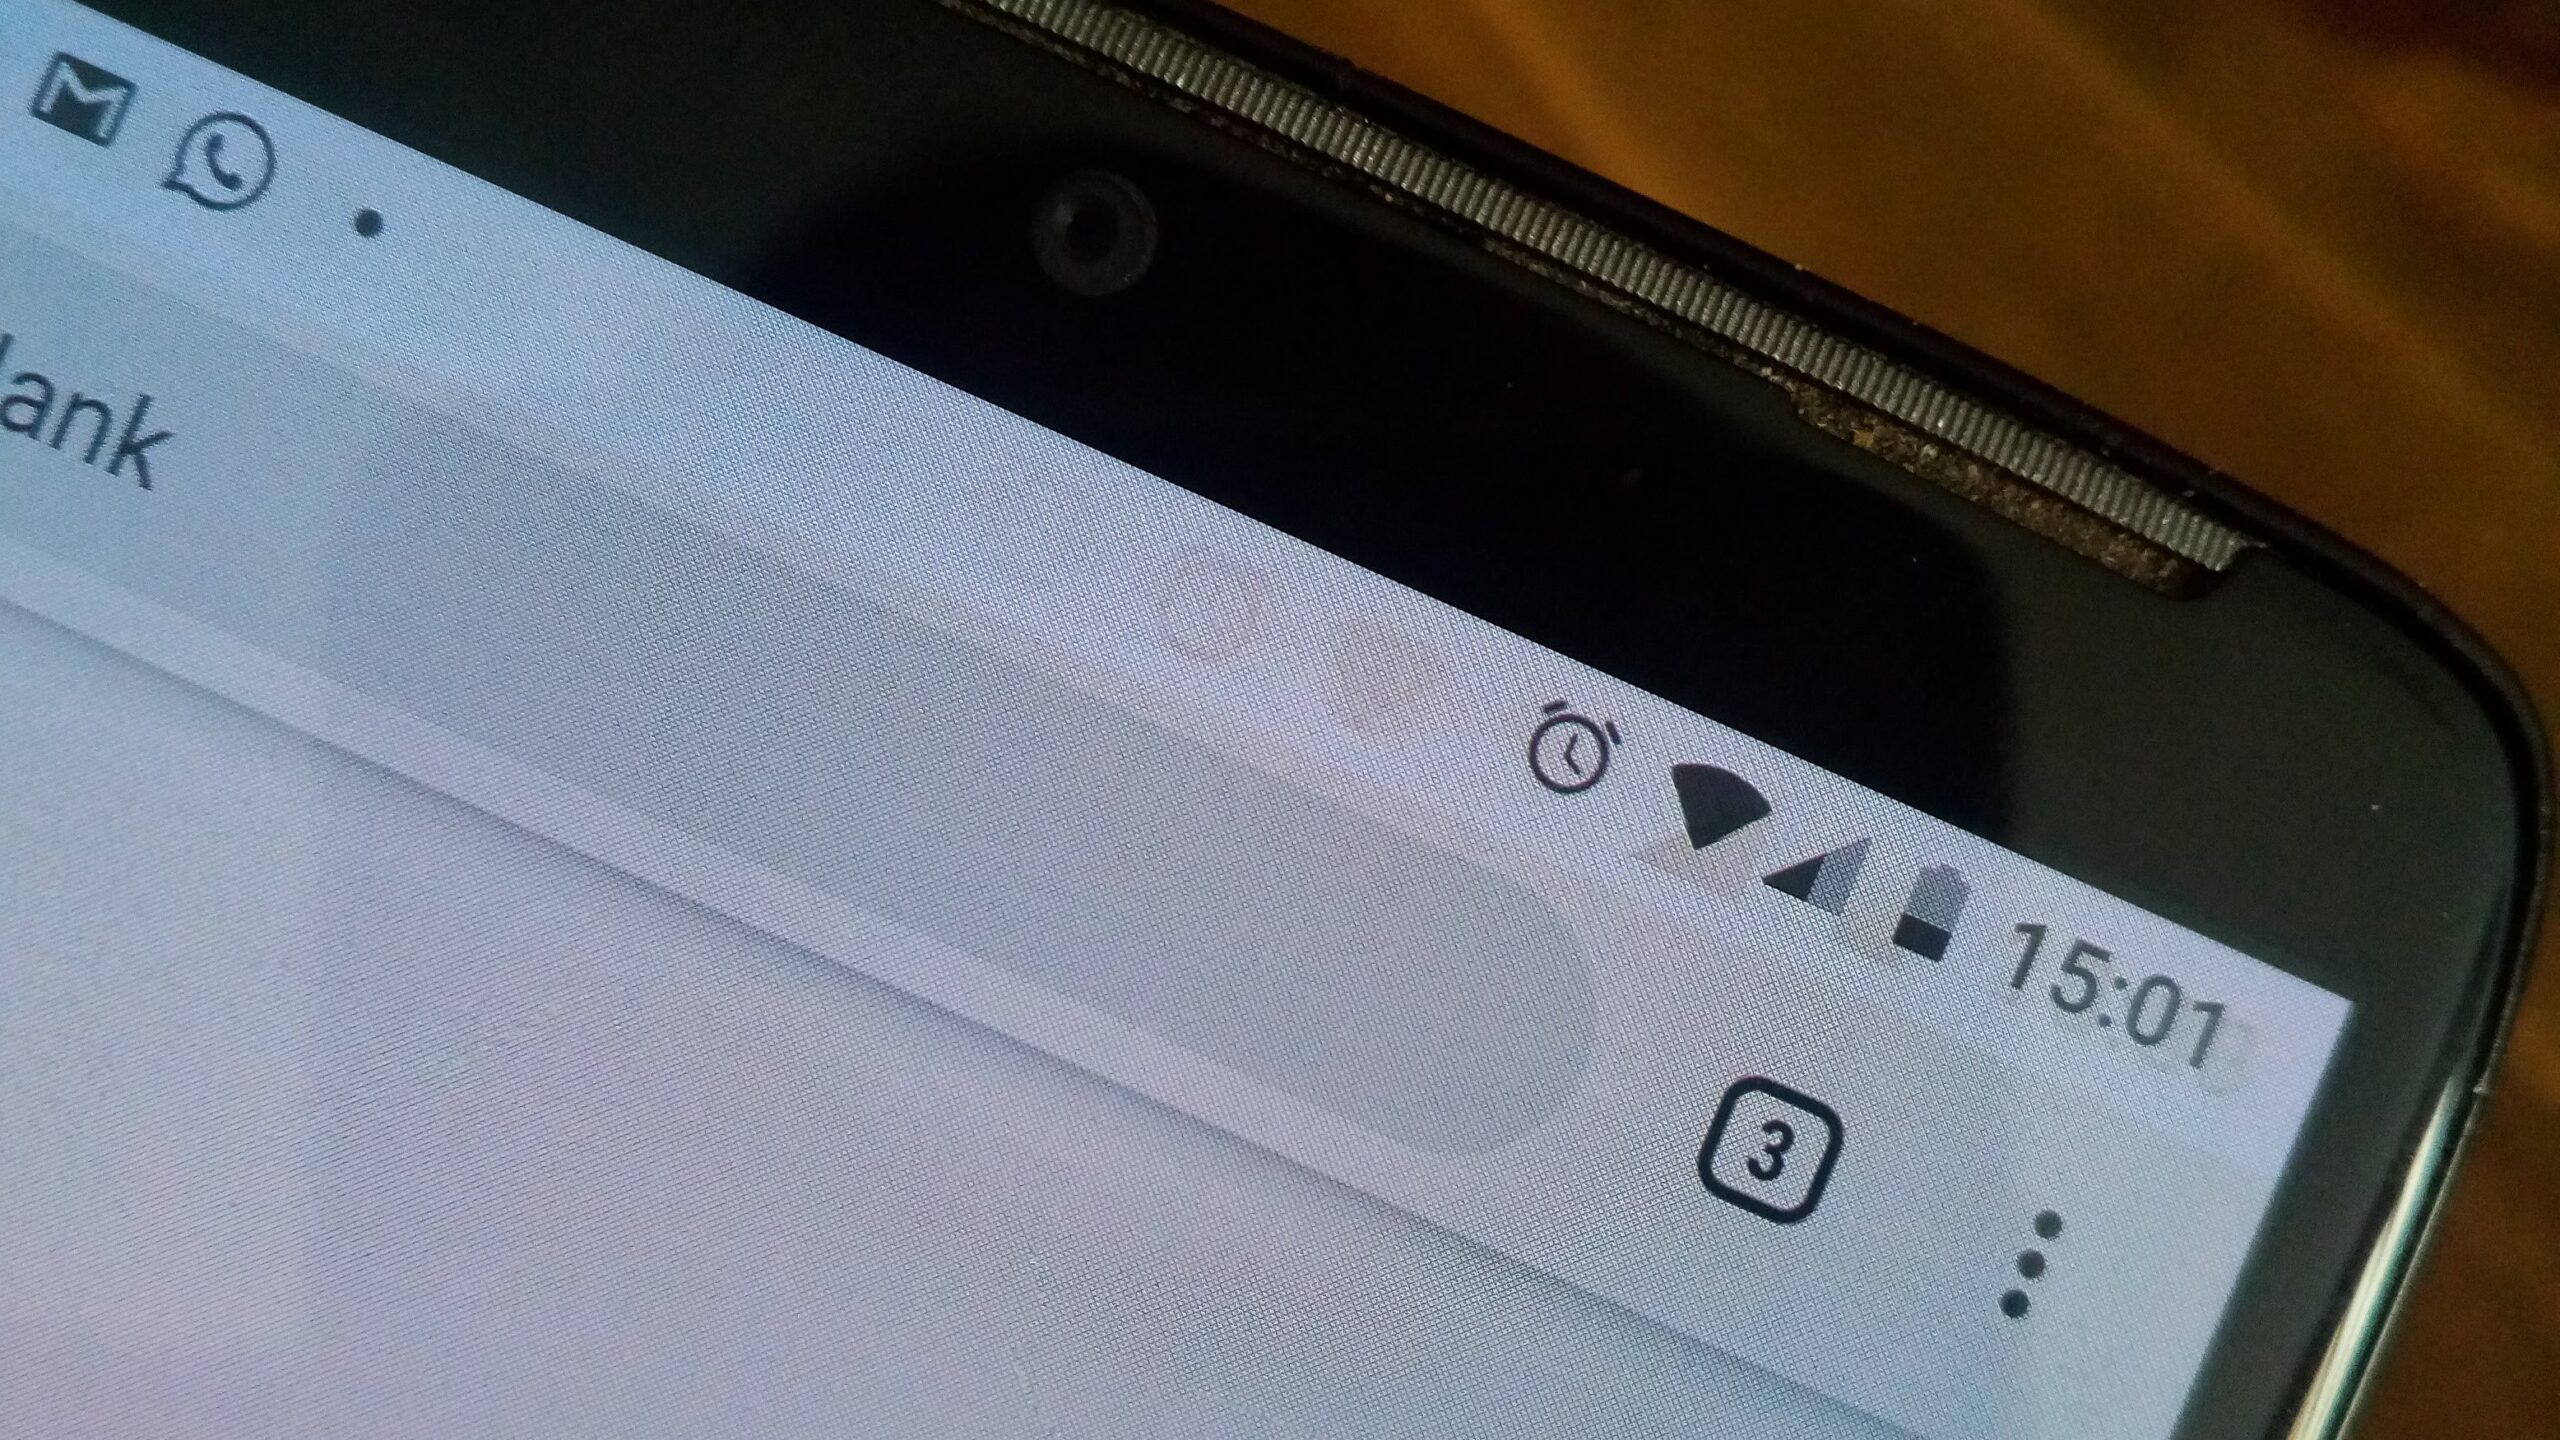 How to get rid of the Burn-in effect on your Android screen